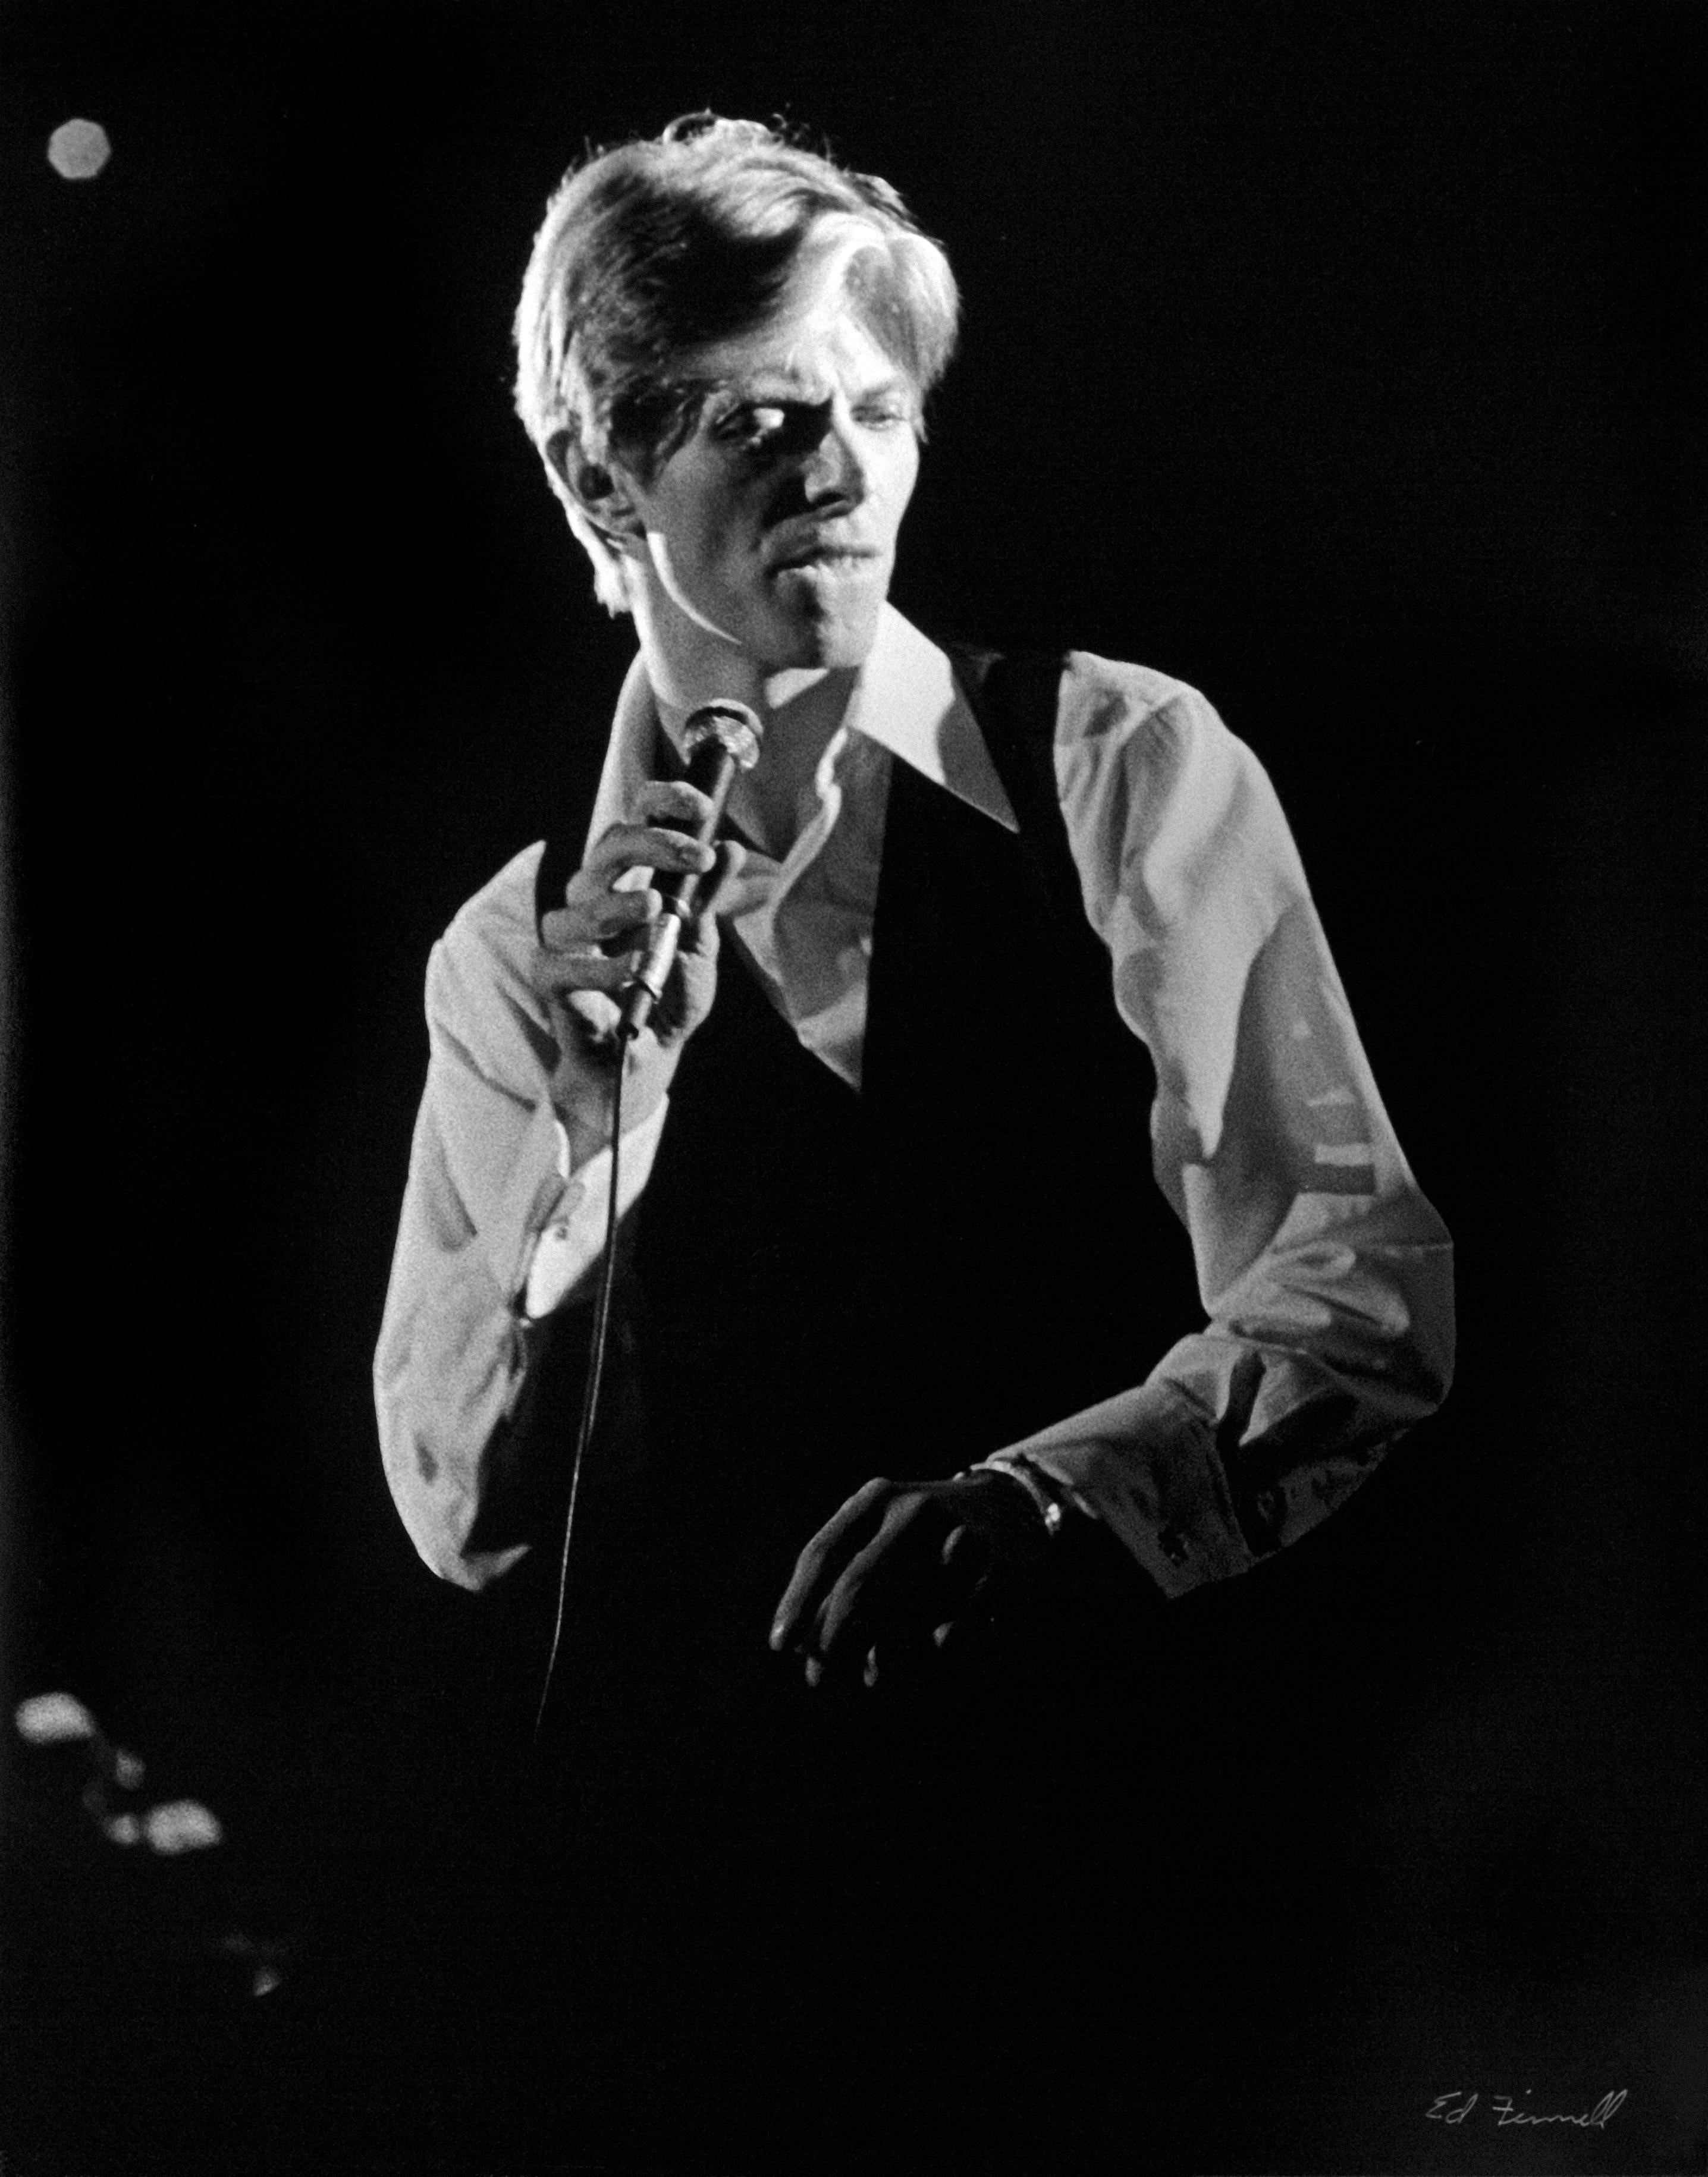 david bowie station to station tour